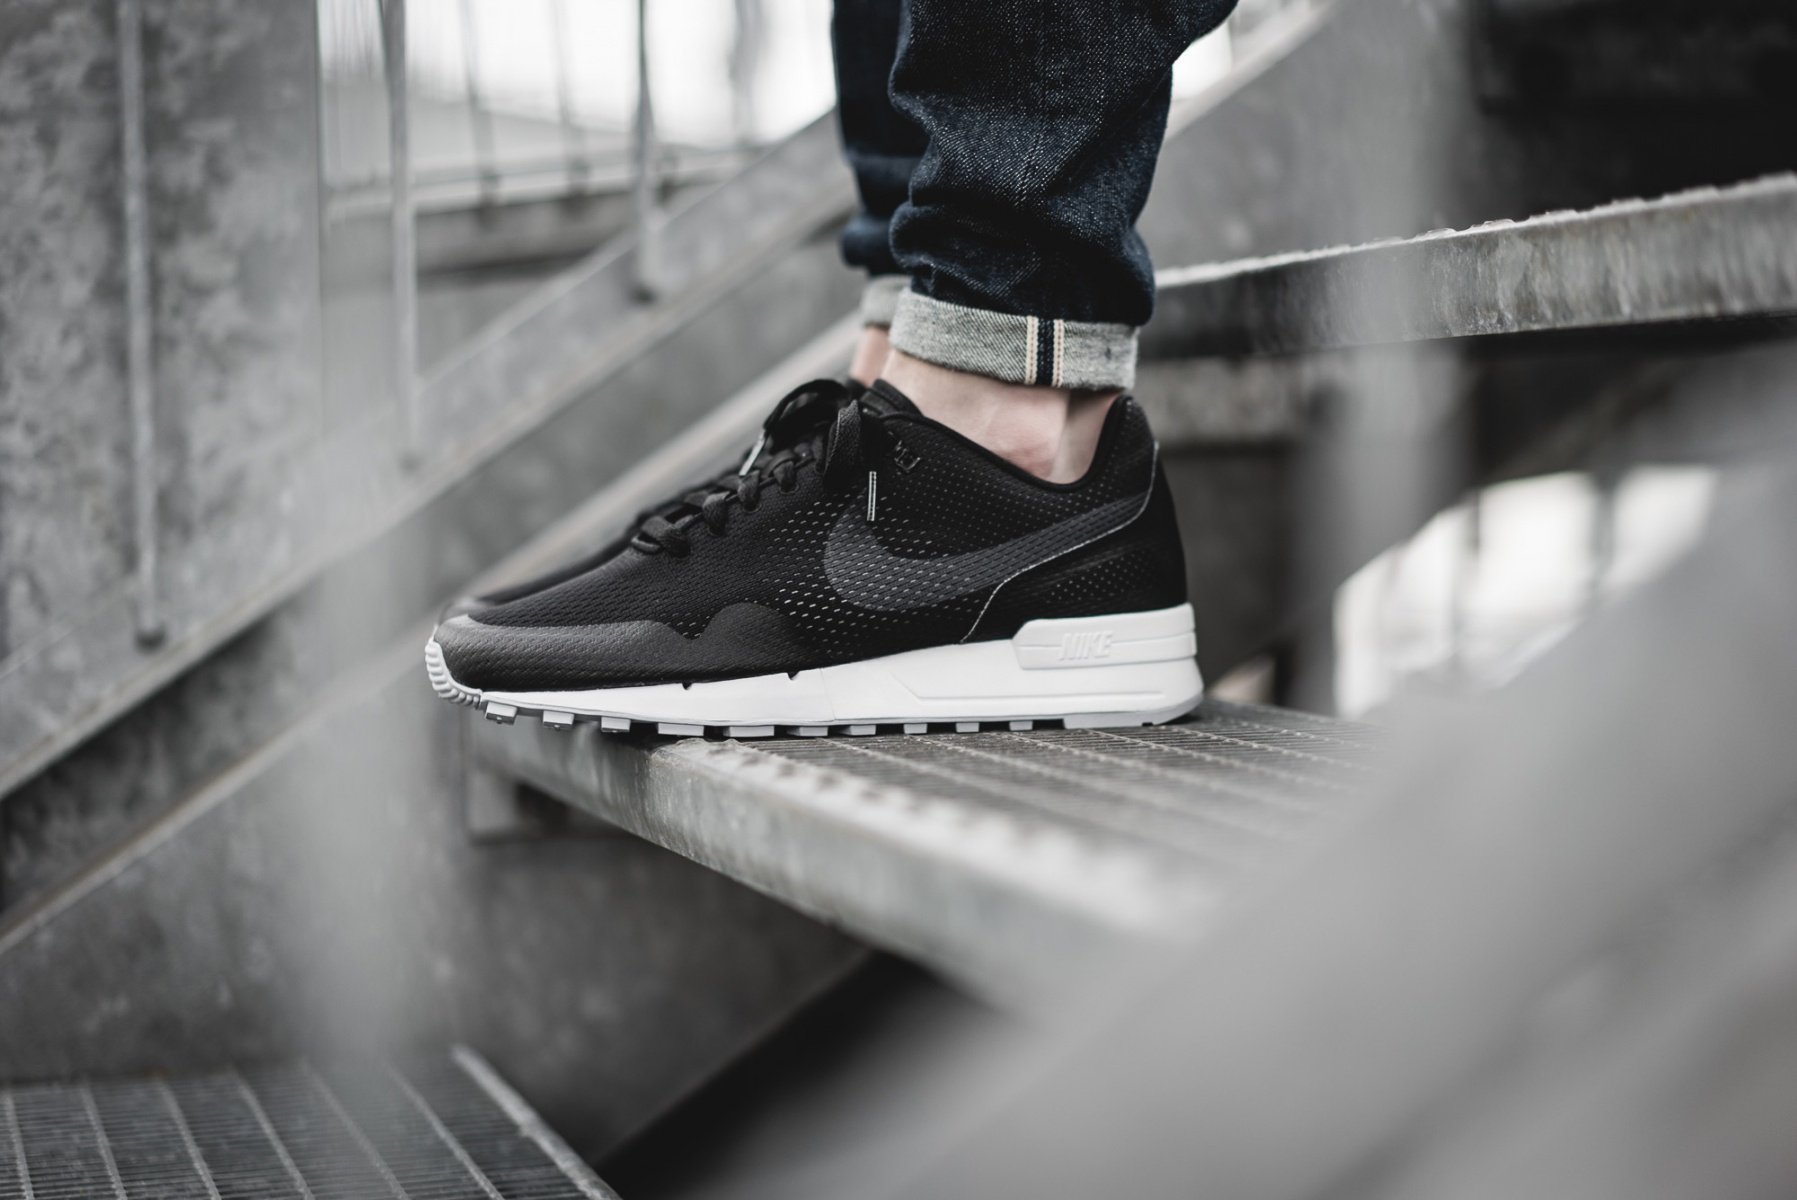 fracture personality Thoroughly KICKS CREW on Twitter: "Nike Air Pegasus 89 Engineered (876111-001) Black  White New Arrival https://t.co/mM57rs0FJx https://t.co/bMobcqvCCy" / Twitter